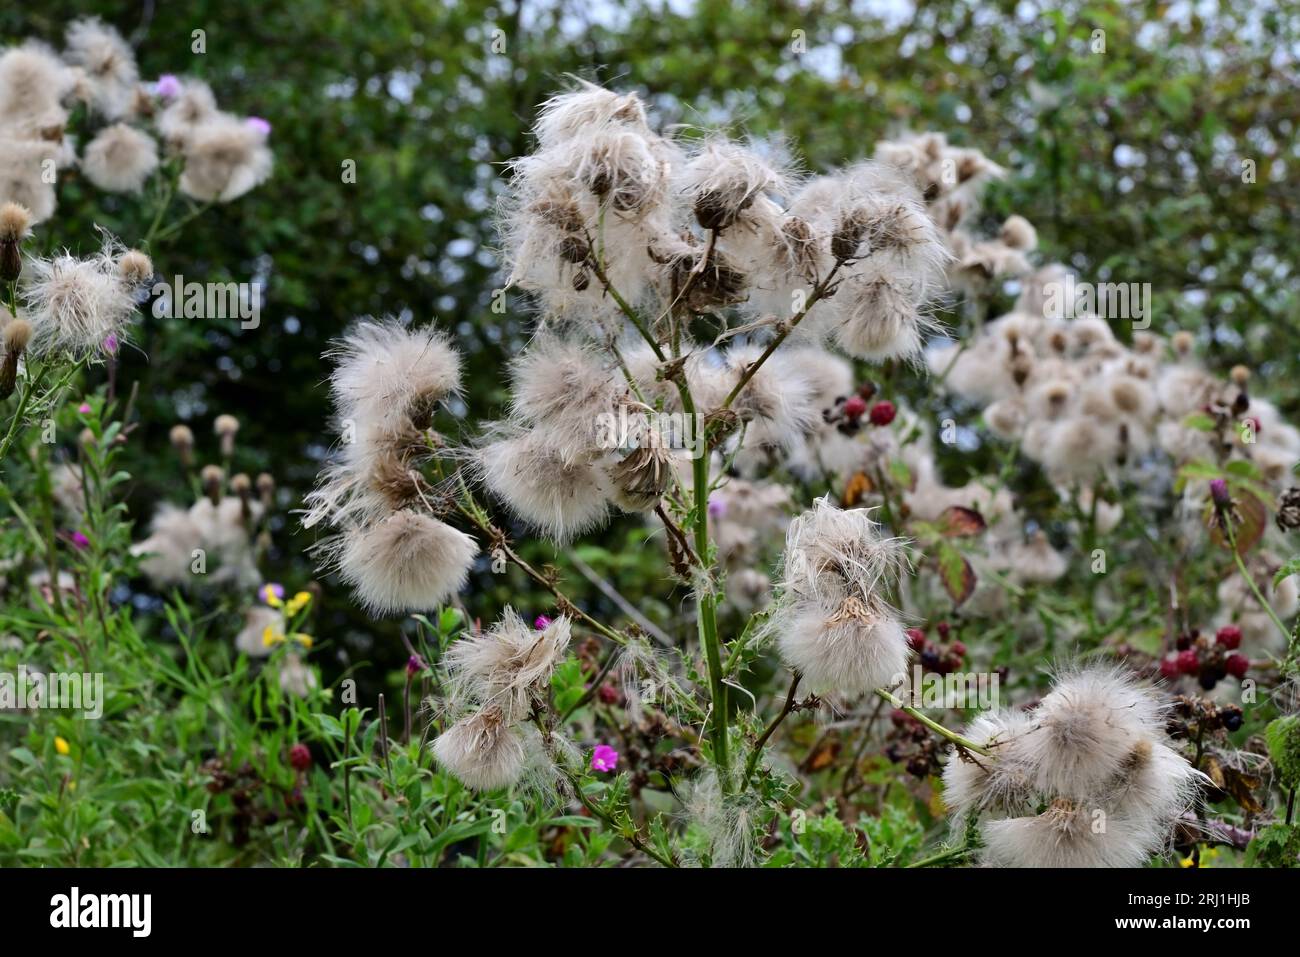 Around the UK - Thistle Seed heads on a hedgerow plant in Cuerden Vally Park, Chorley Stock Photo